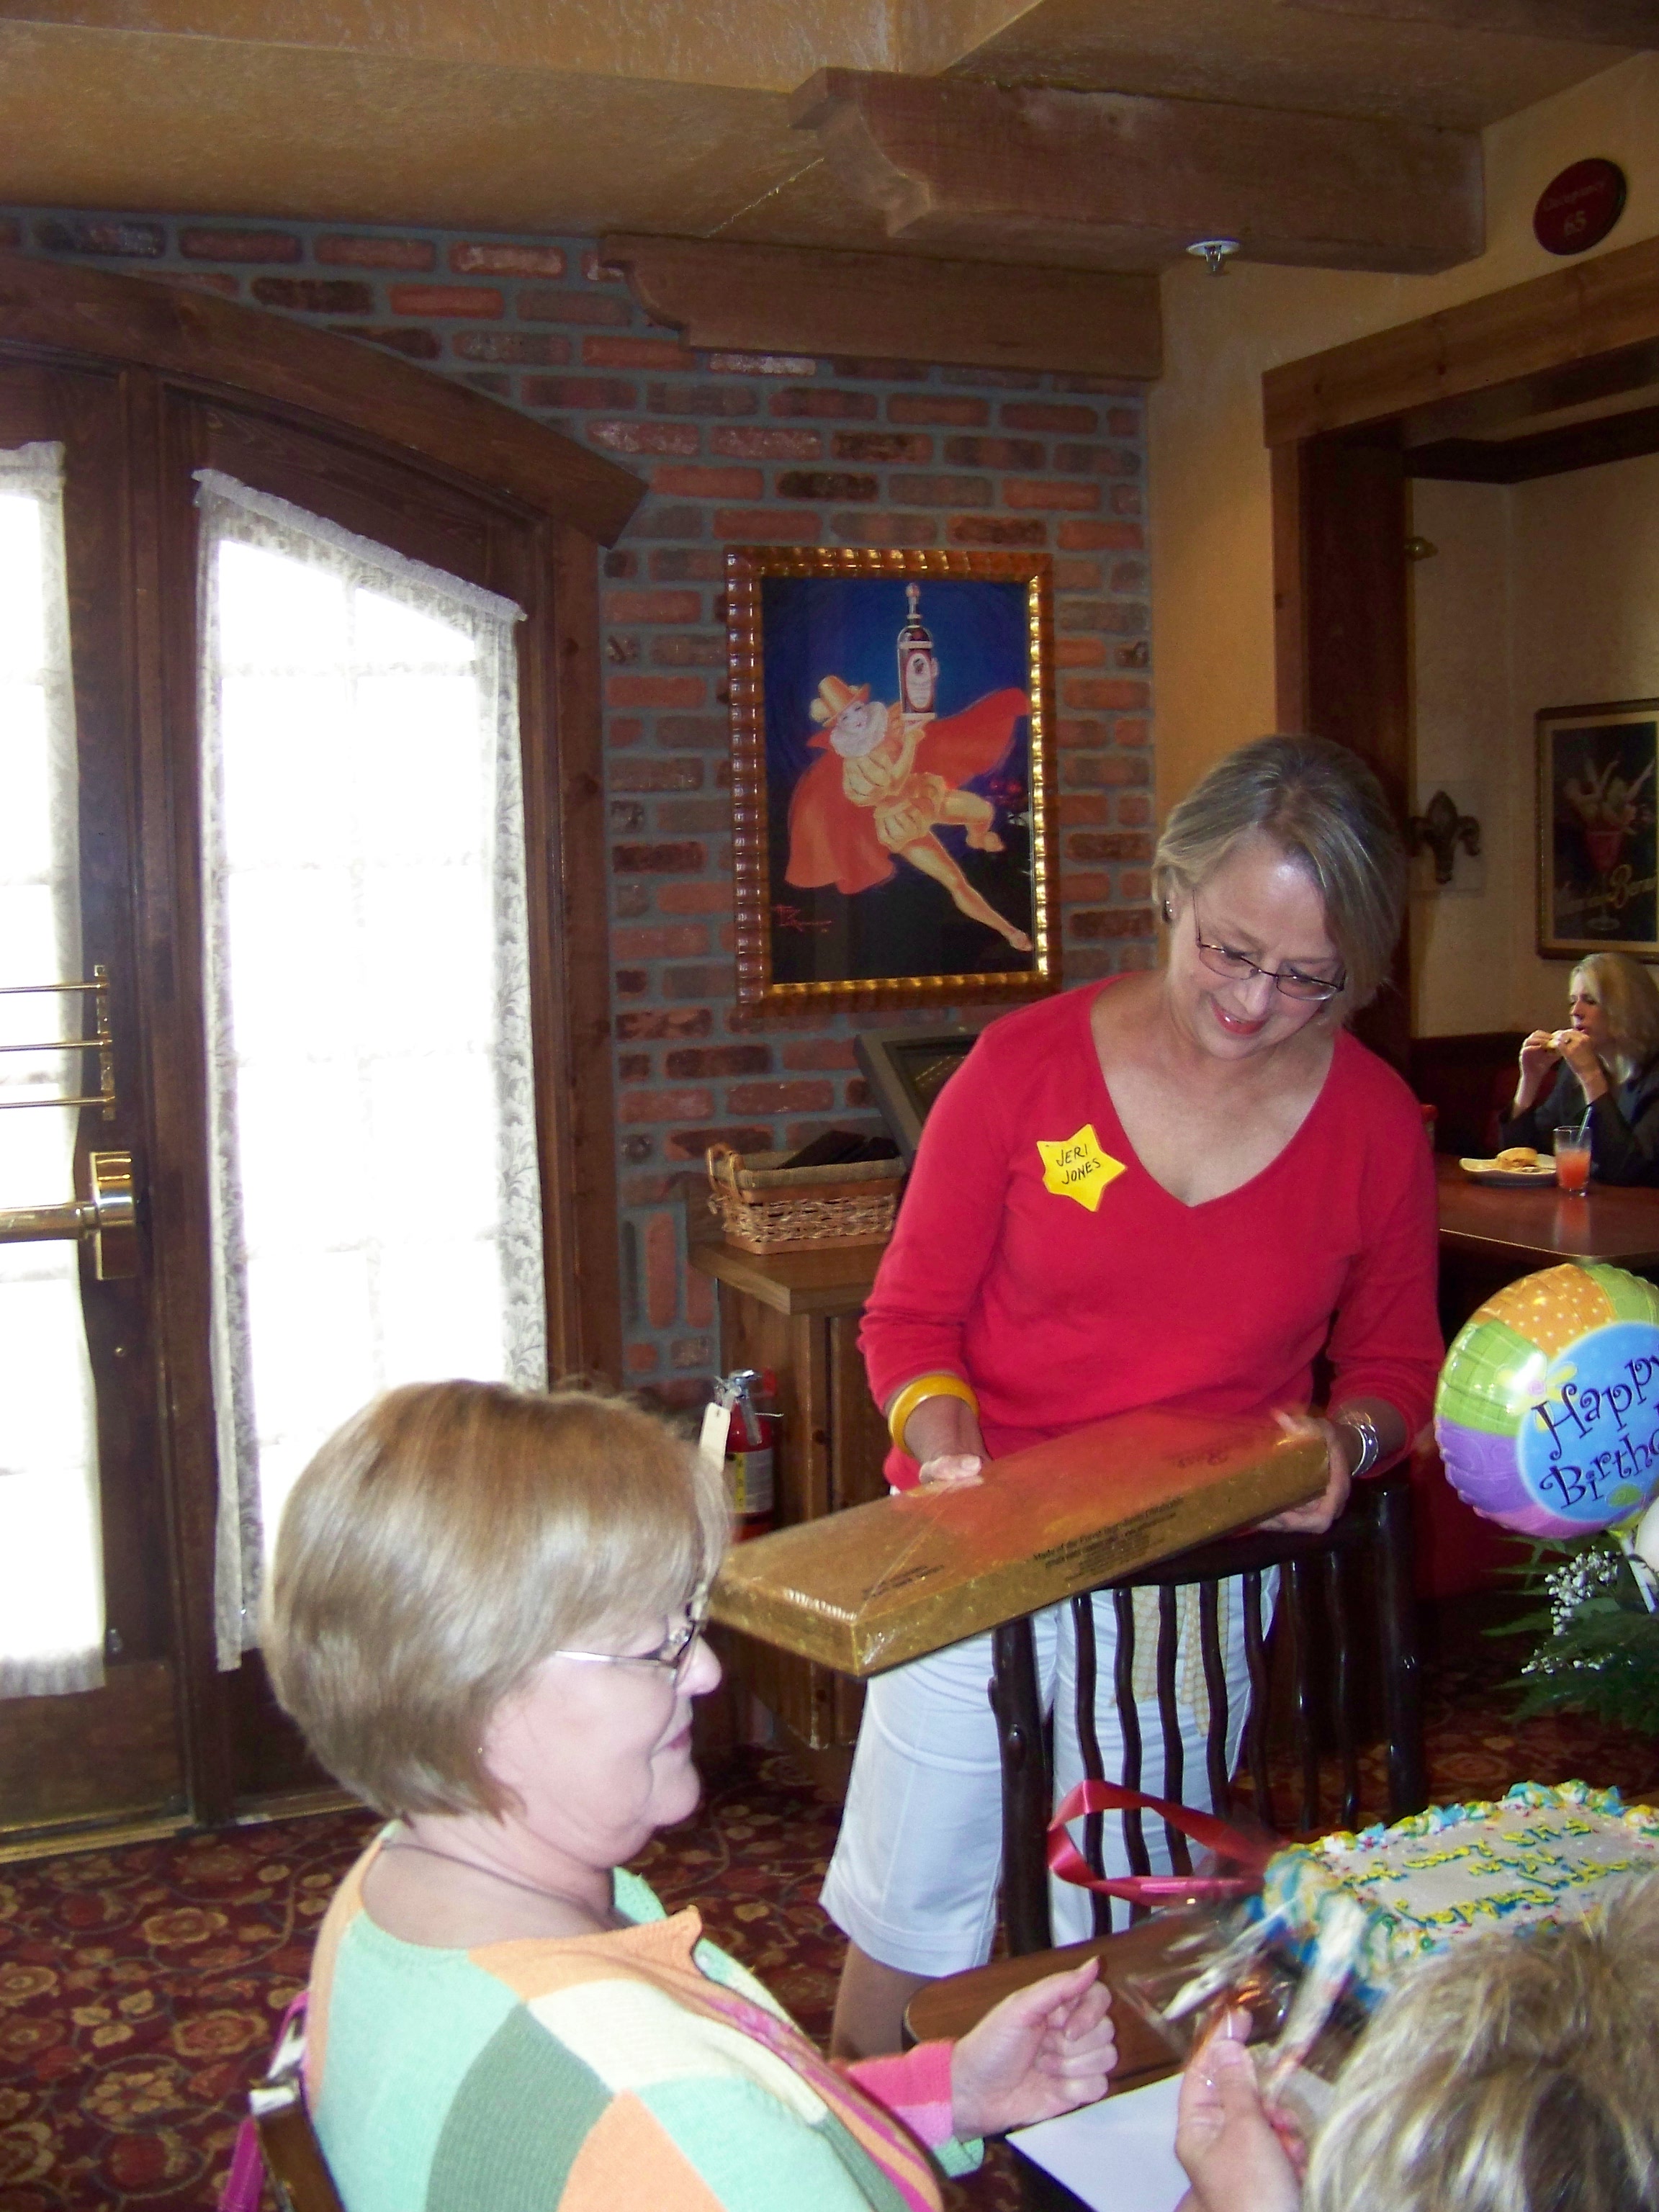 Jeri Jones opening the box of Esther Price chocolates Sandie Sturdivant sent in memory of Nancy. There was so much candy that everyone had to take a bag full home! Thank you Sandie.